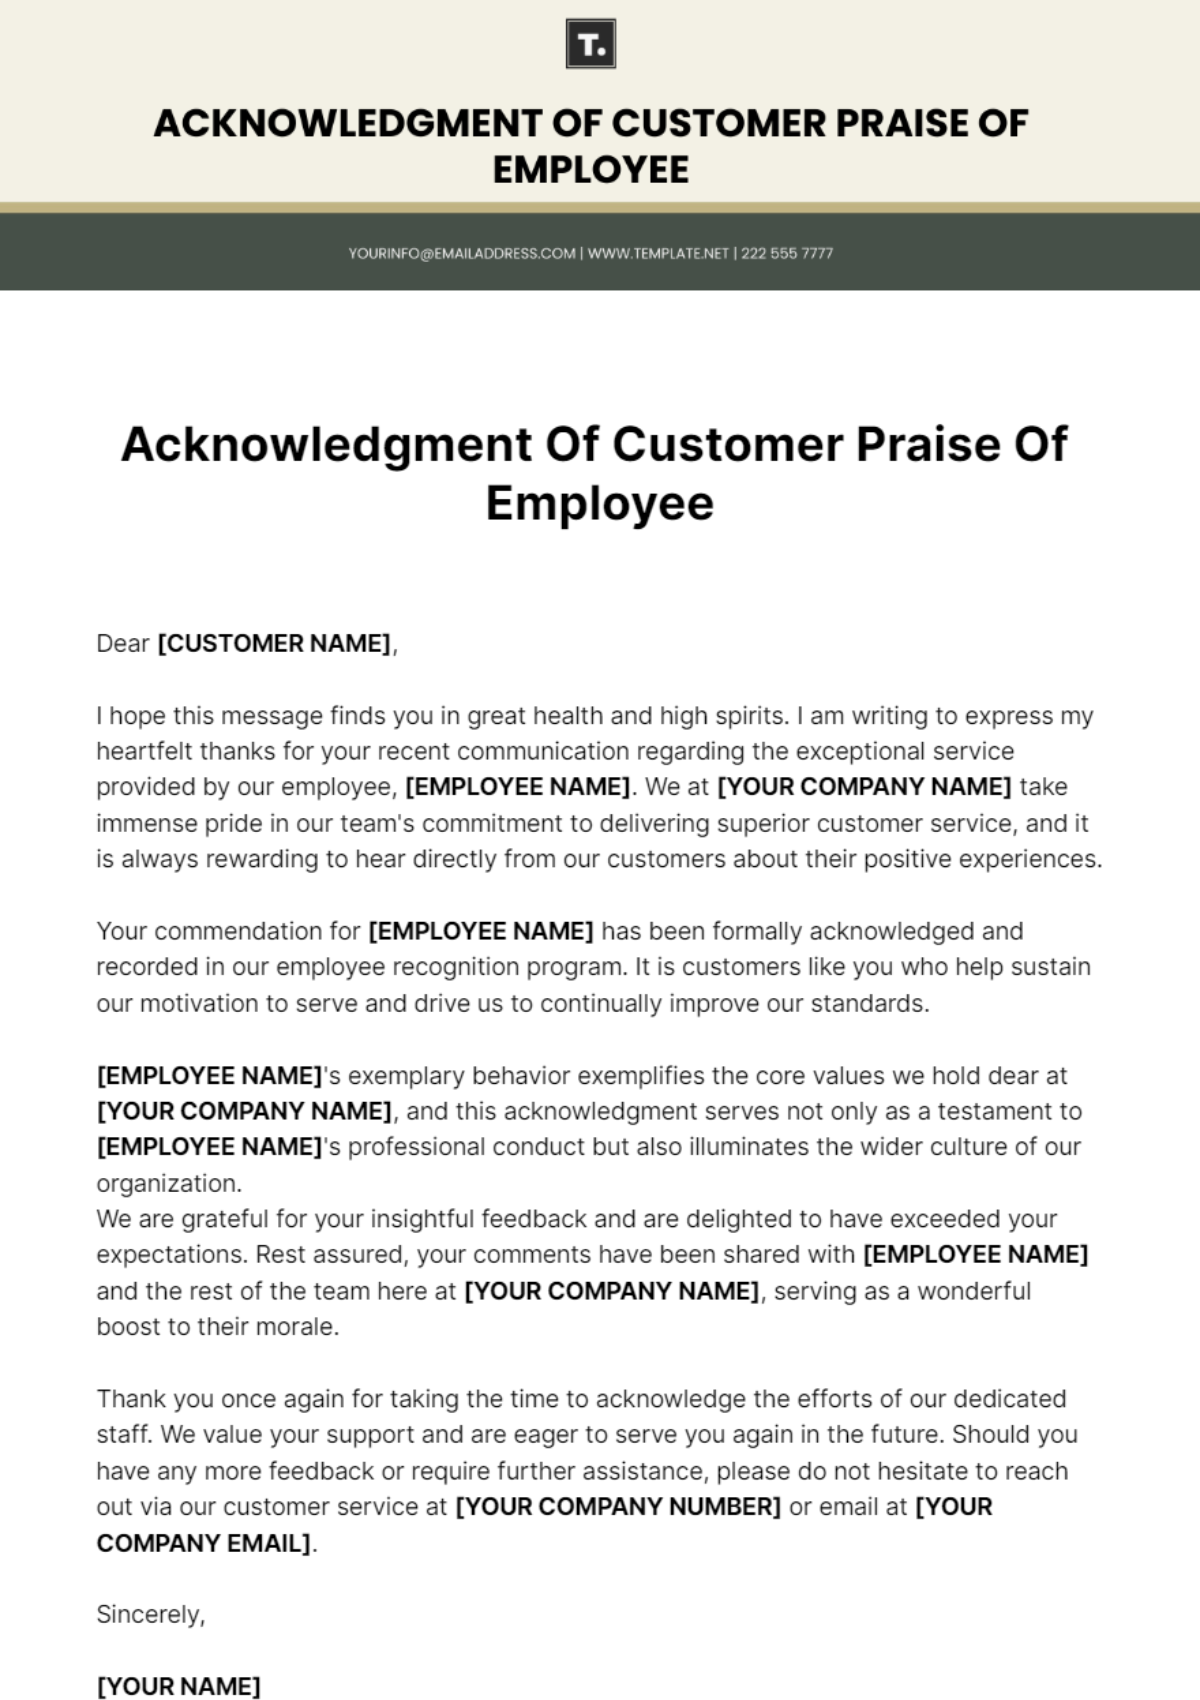 Acknowledgment Of Customer Praise Of Employee Template